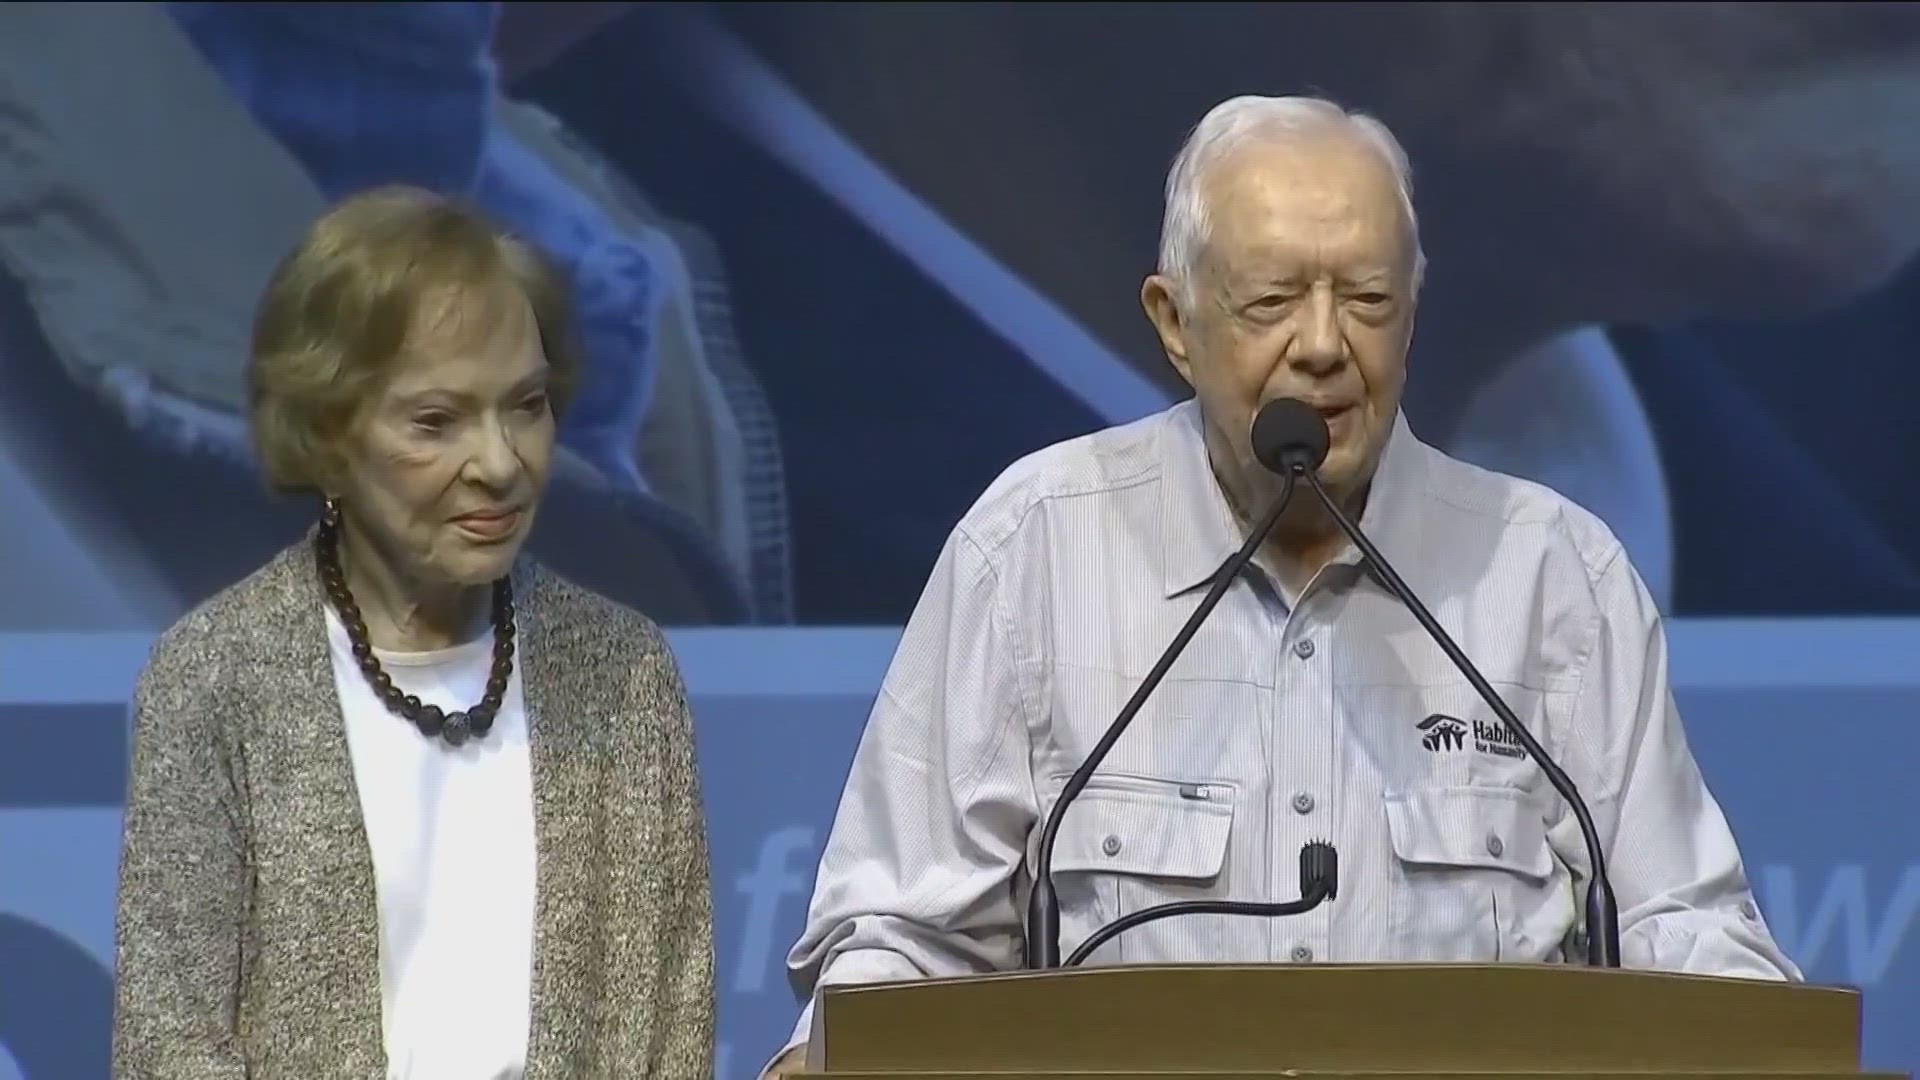 The announcement comes three months after it was announced that Jimmy Carter had entered home hospice care.